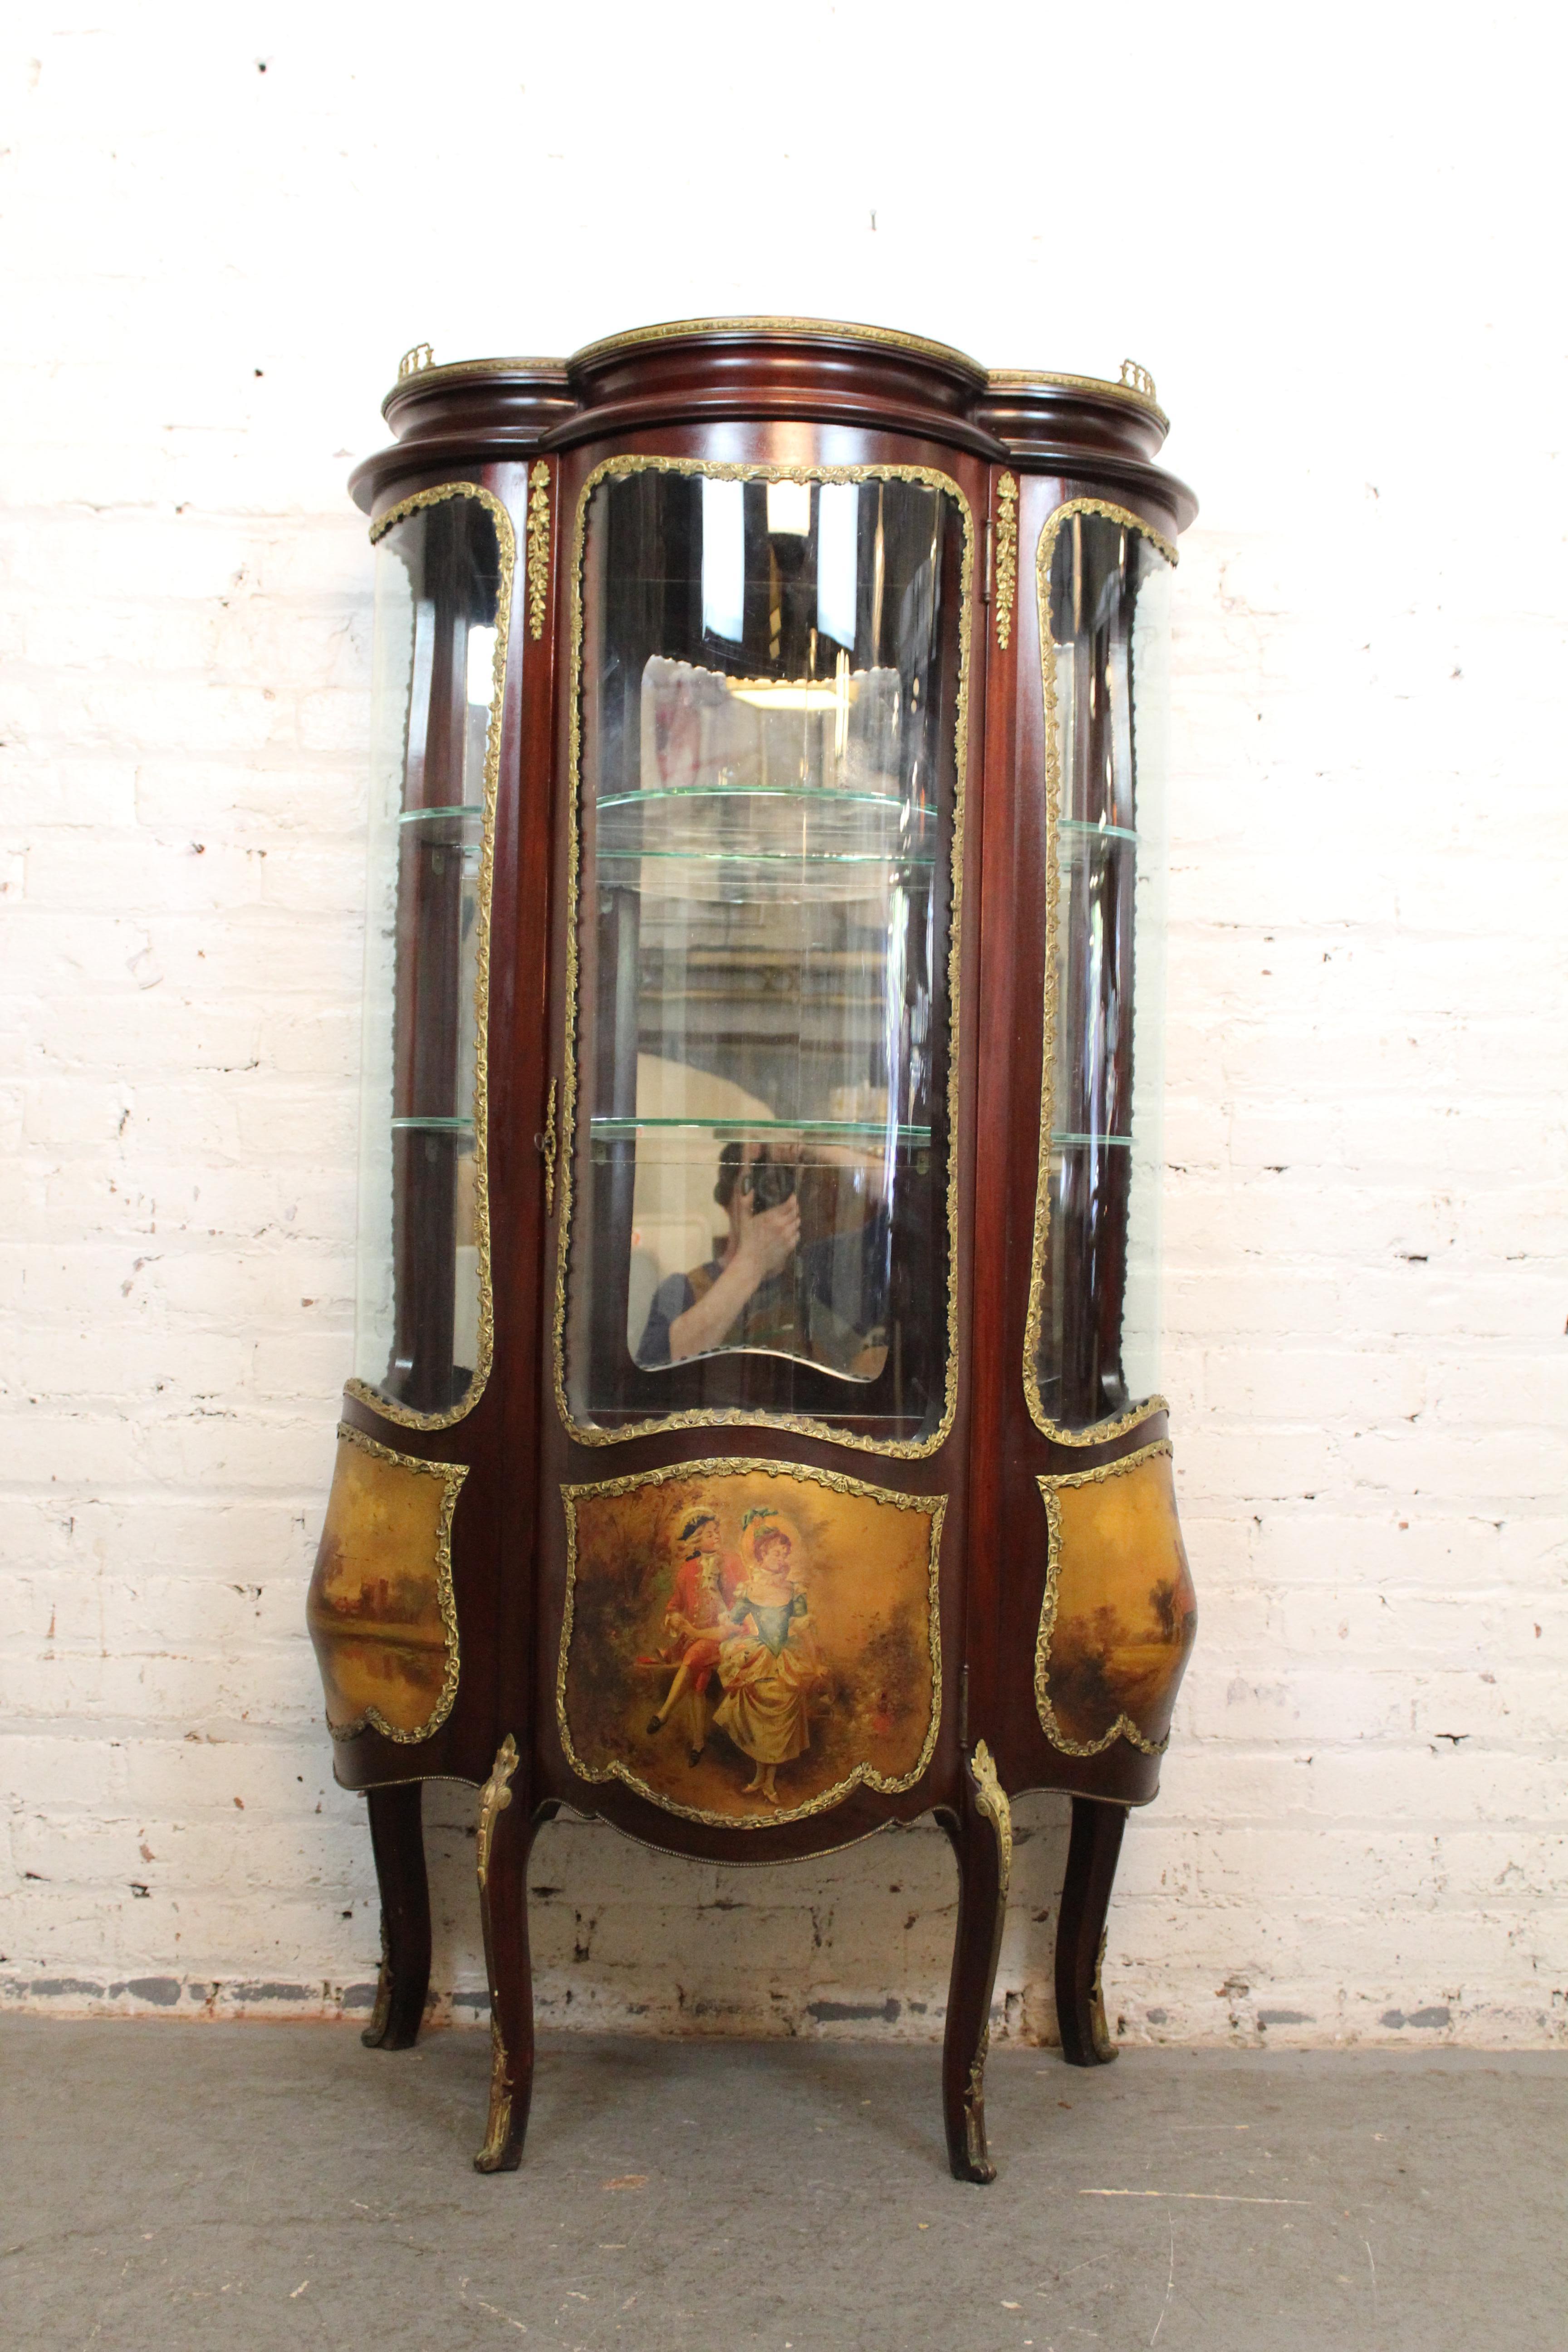 Give any room both a worldly appeal and a sense of history with this fantastic, hand-painted vernis Martin bomb vitrine! Built in the legendary Louis XV style by artisanal French craftsmen of the late 19th/early 20th century, this ornate display